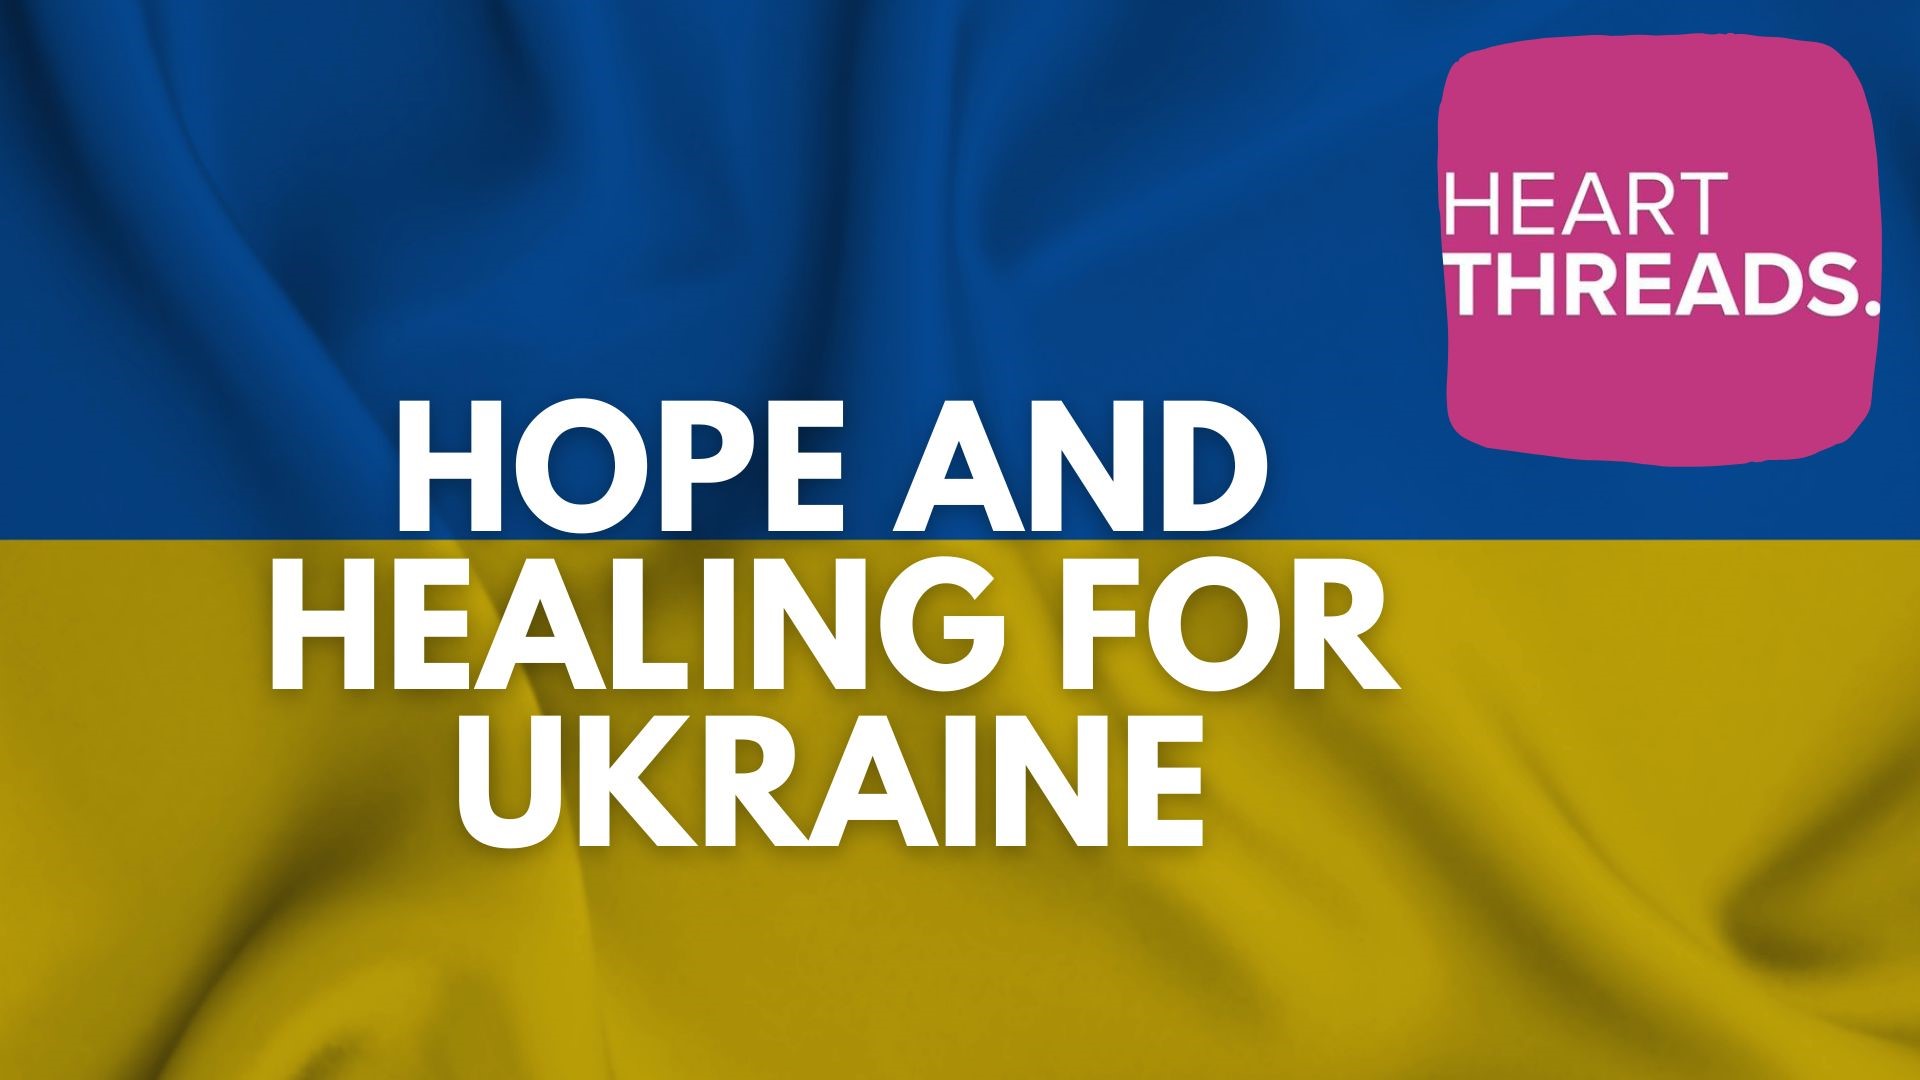 A collection of heartwarming stories of people providing hope and healing to refugees from Ukraine.